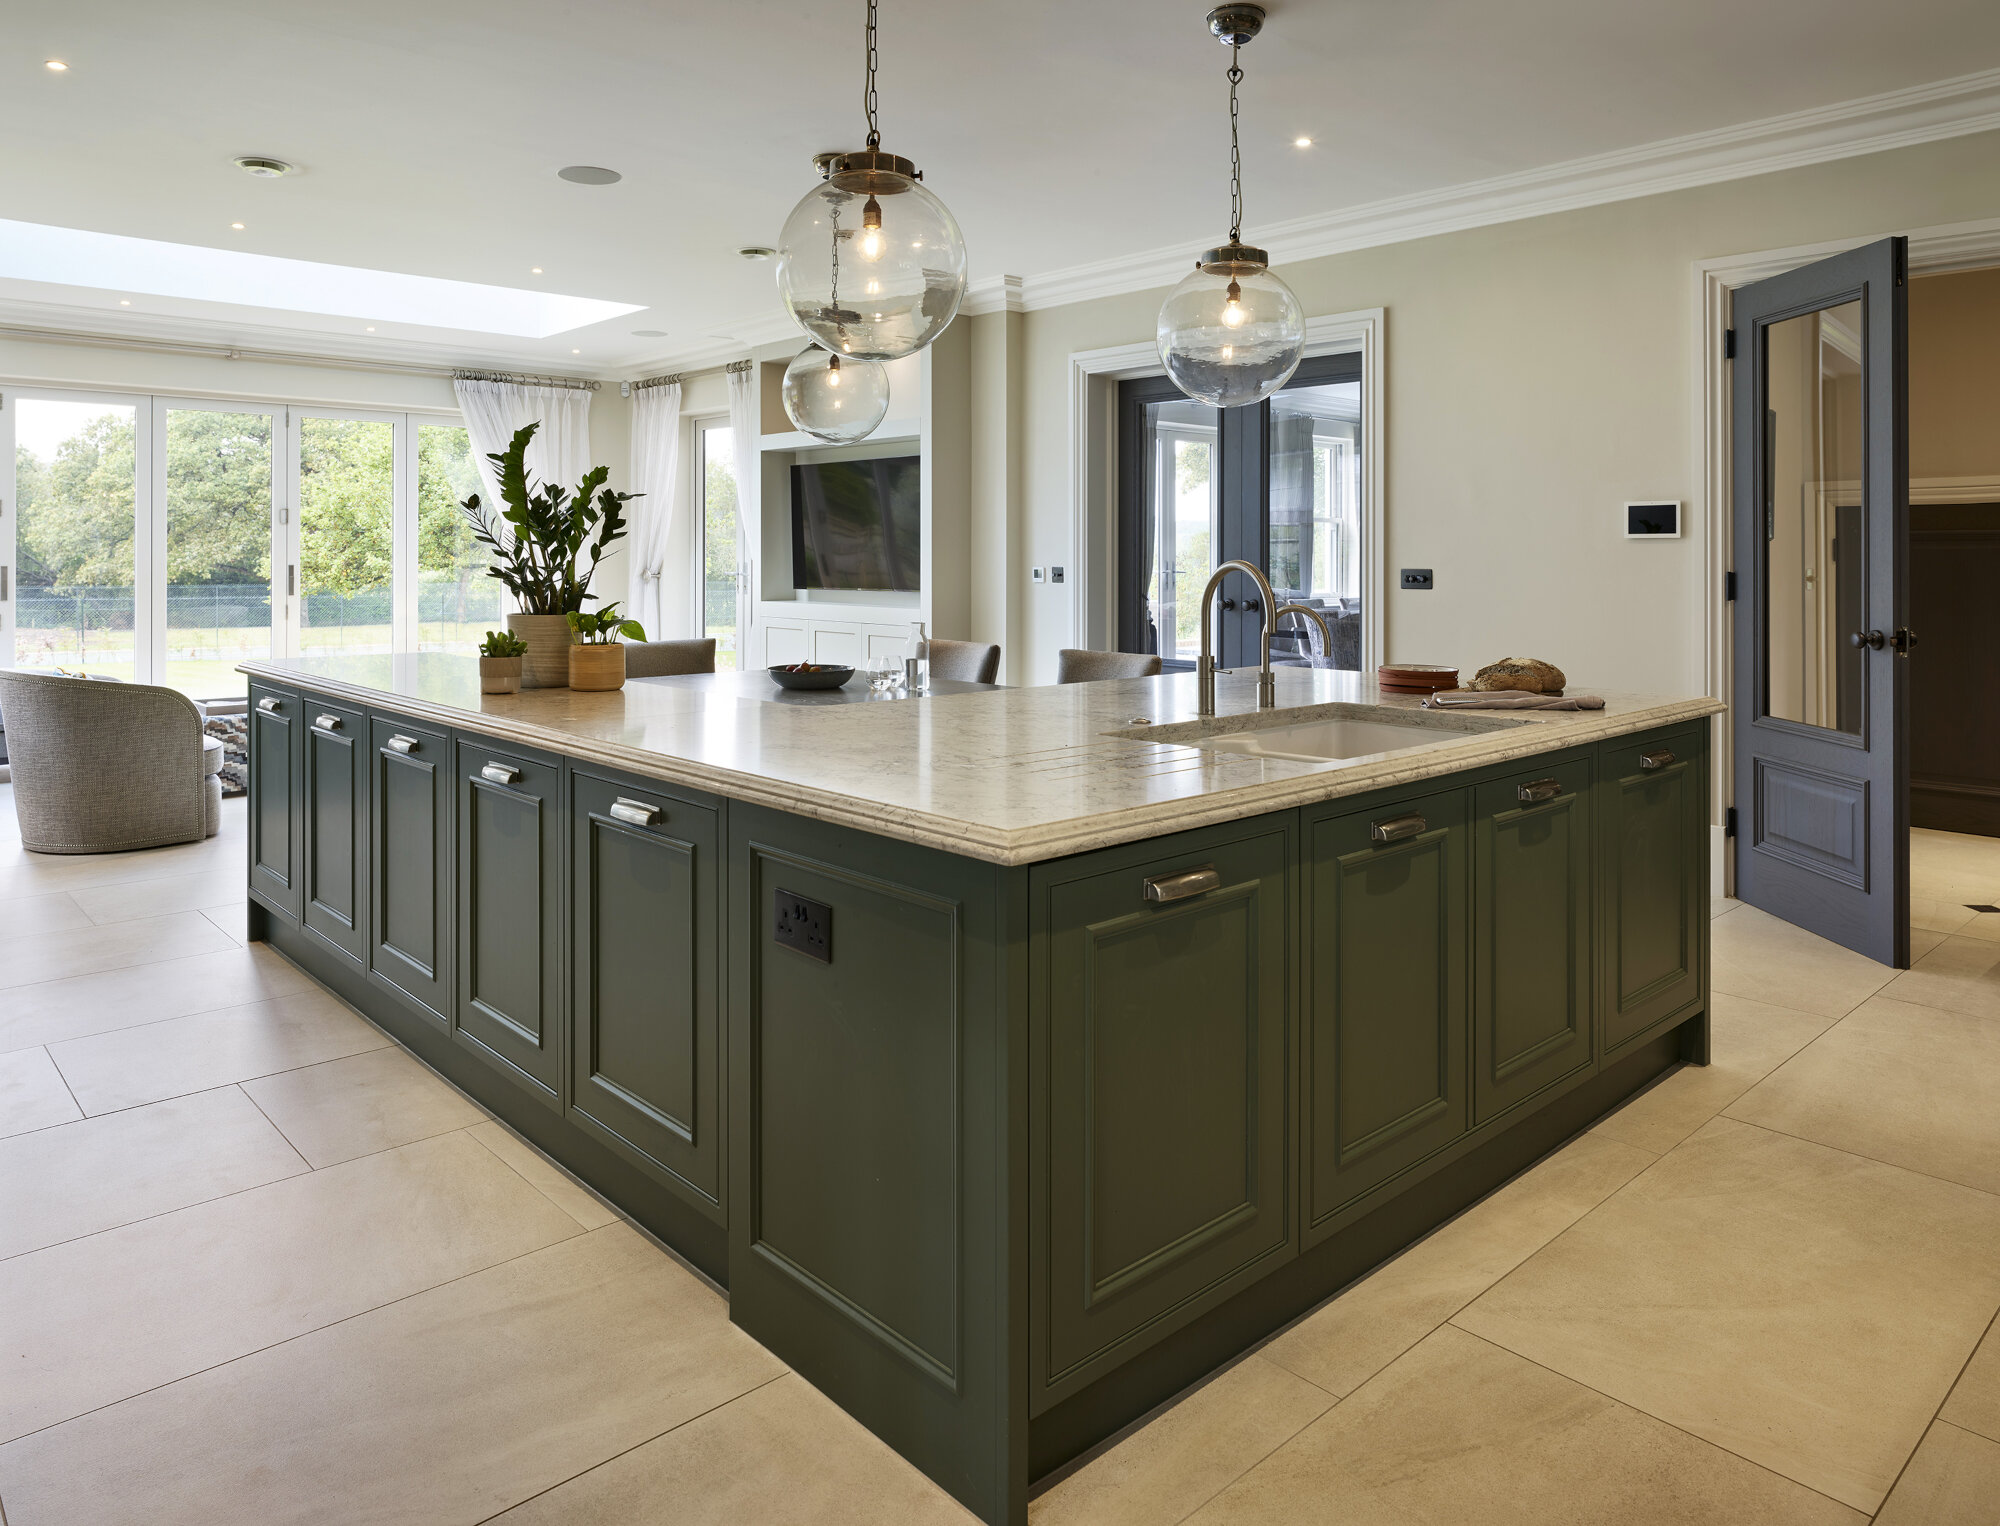 High End traditional Kitchens In Woodhall Spa